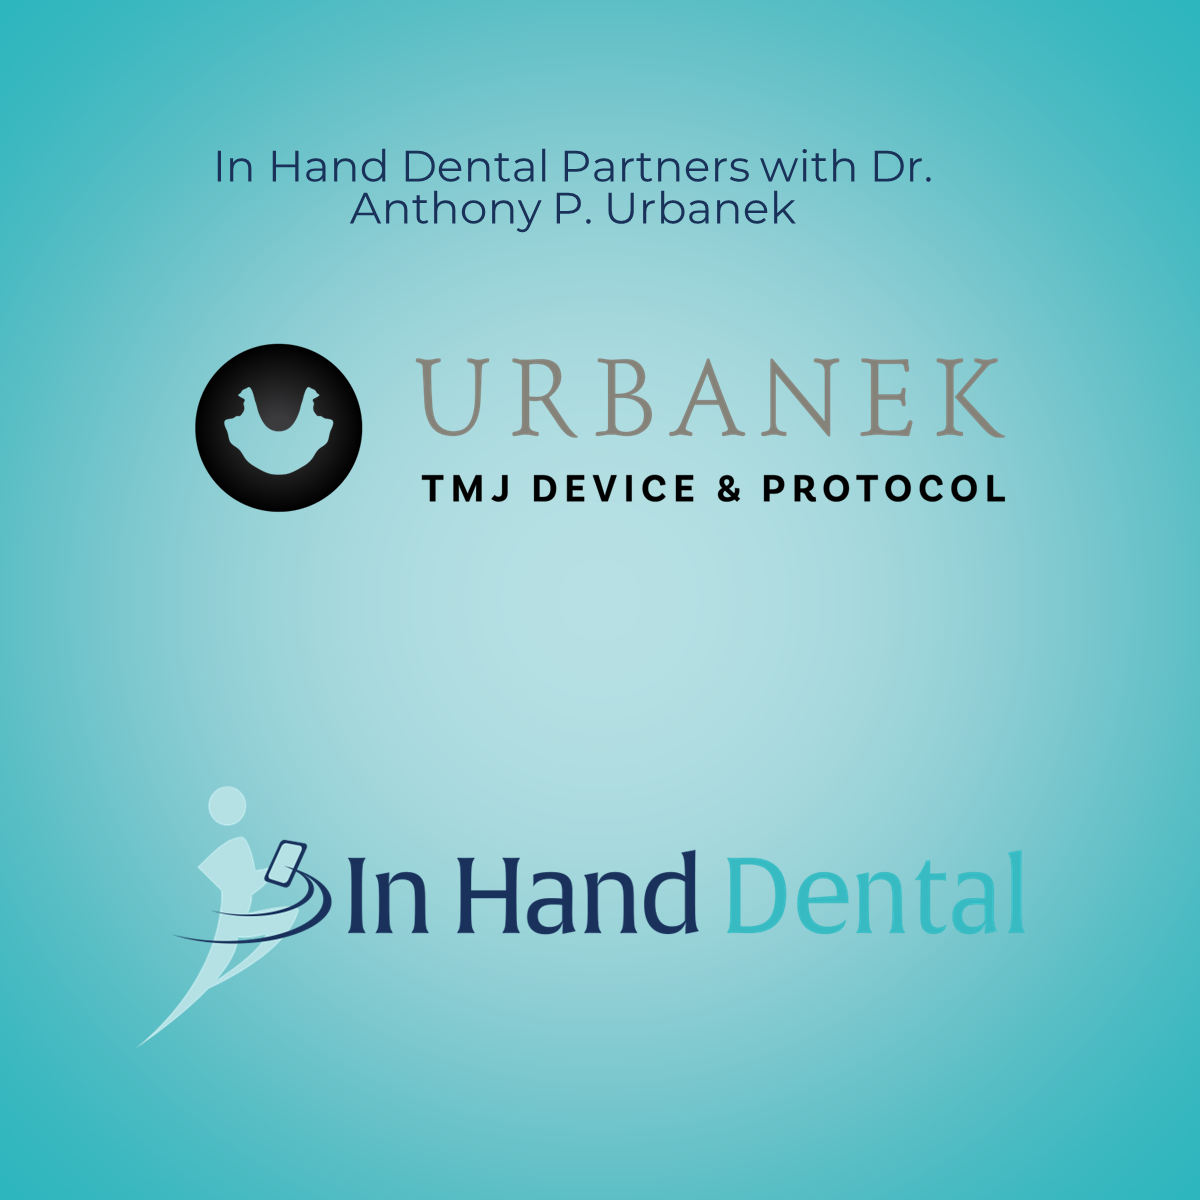  TMJ/TMD Pioneer to Partner with In Hand Dental for Patient Monitoring and Treatment | Image Credit: © In Hand Dental